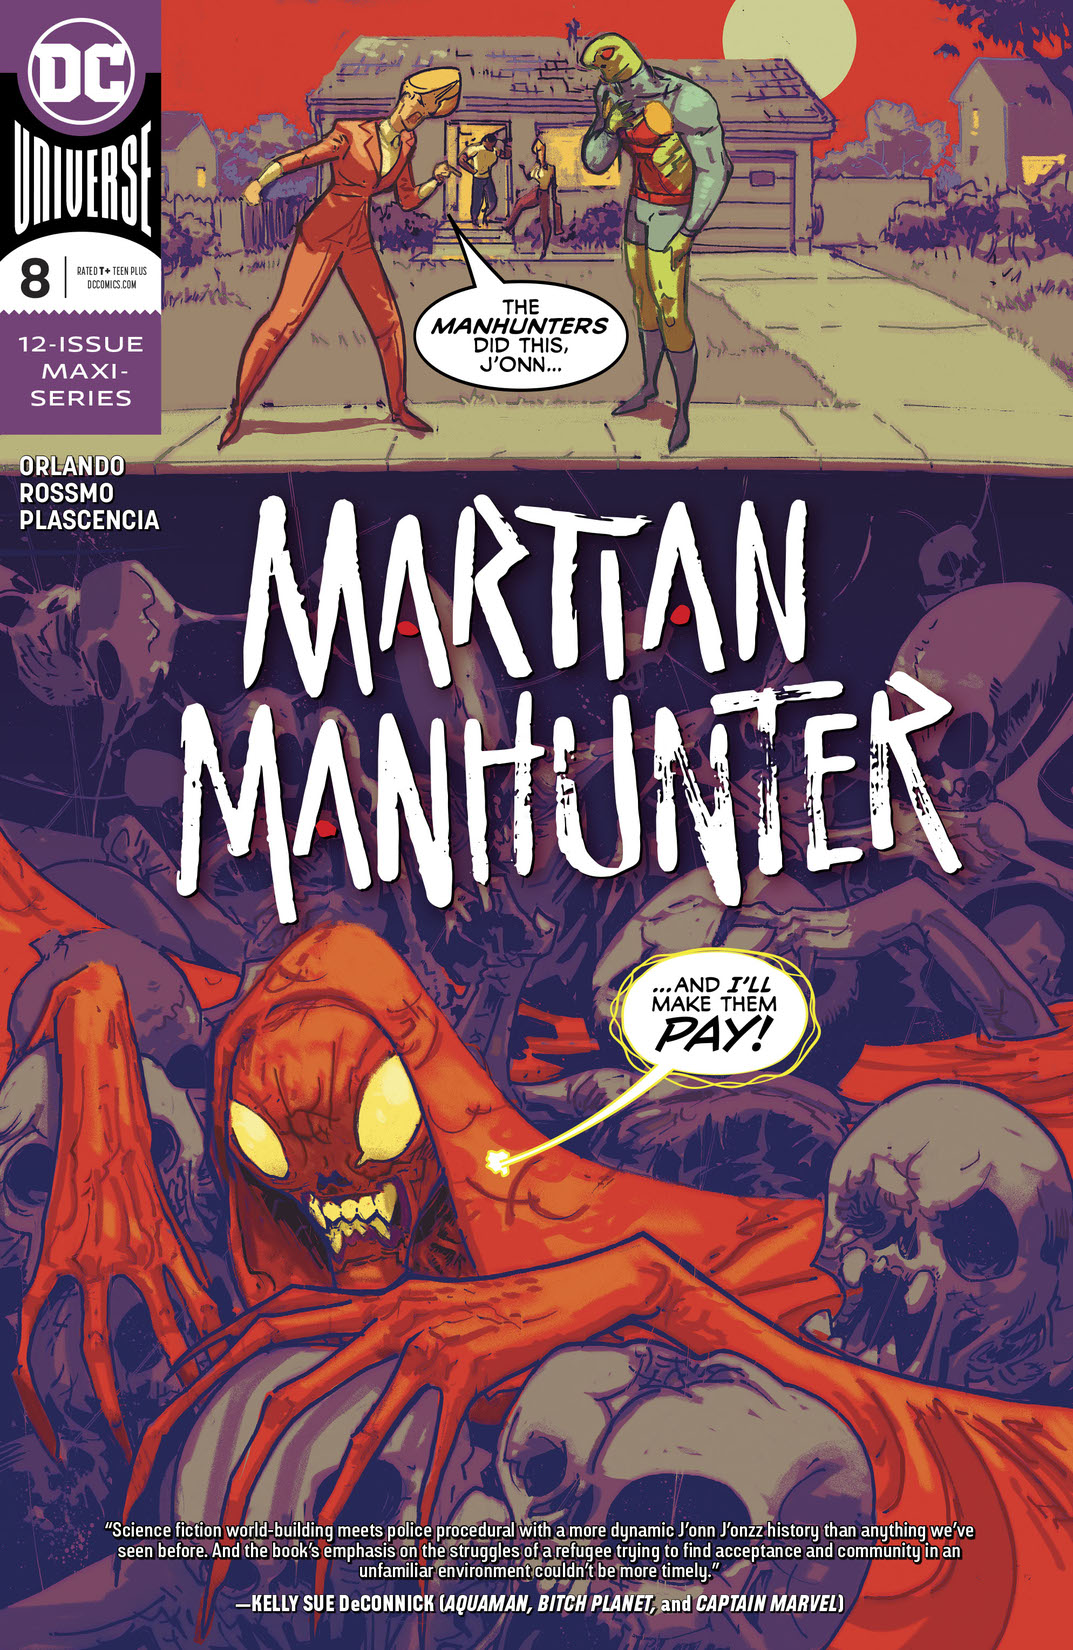 Martian Manhunter (2018-2020) #8 preview images